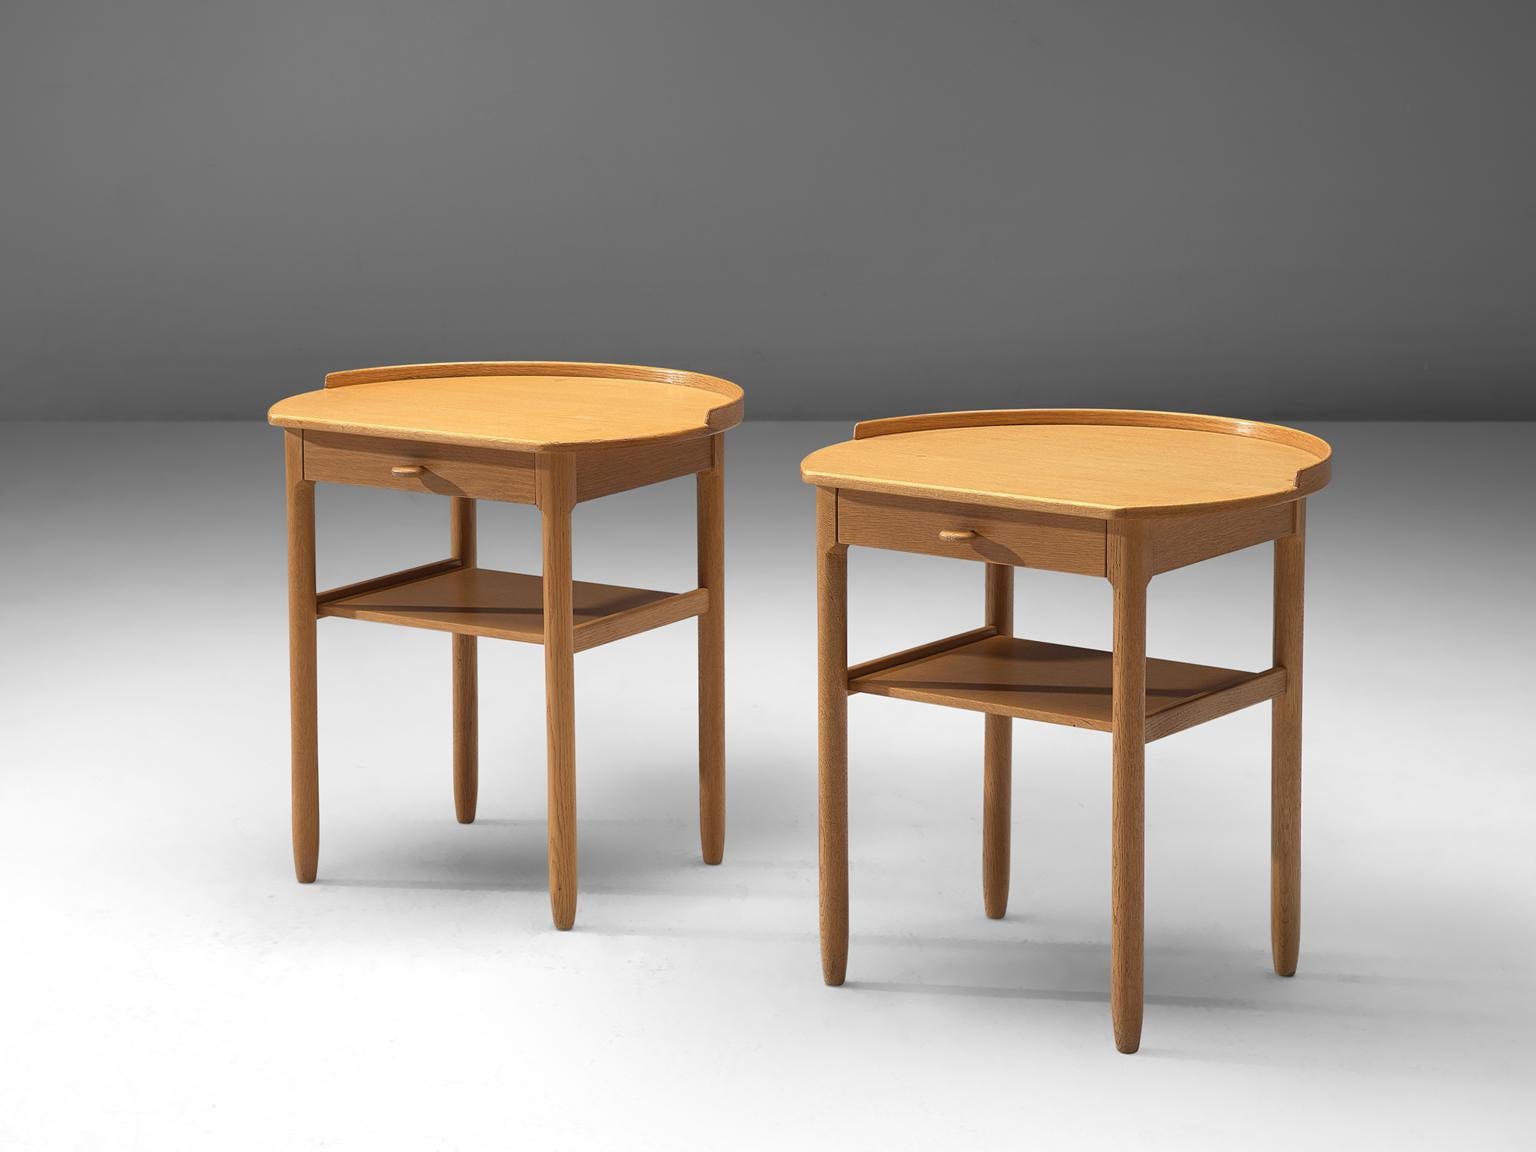 Carl Malmsten for Bodafors, pair of side tables, beech, Sweden, 1962.

This modest set of nightstands is designed by the Swede Carl Malmsten. The tables feature an underlying shelf and rail with small drawer. The drawers are finished with a